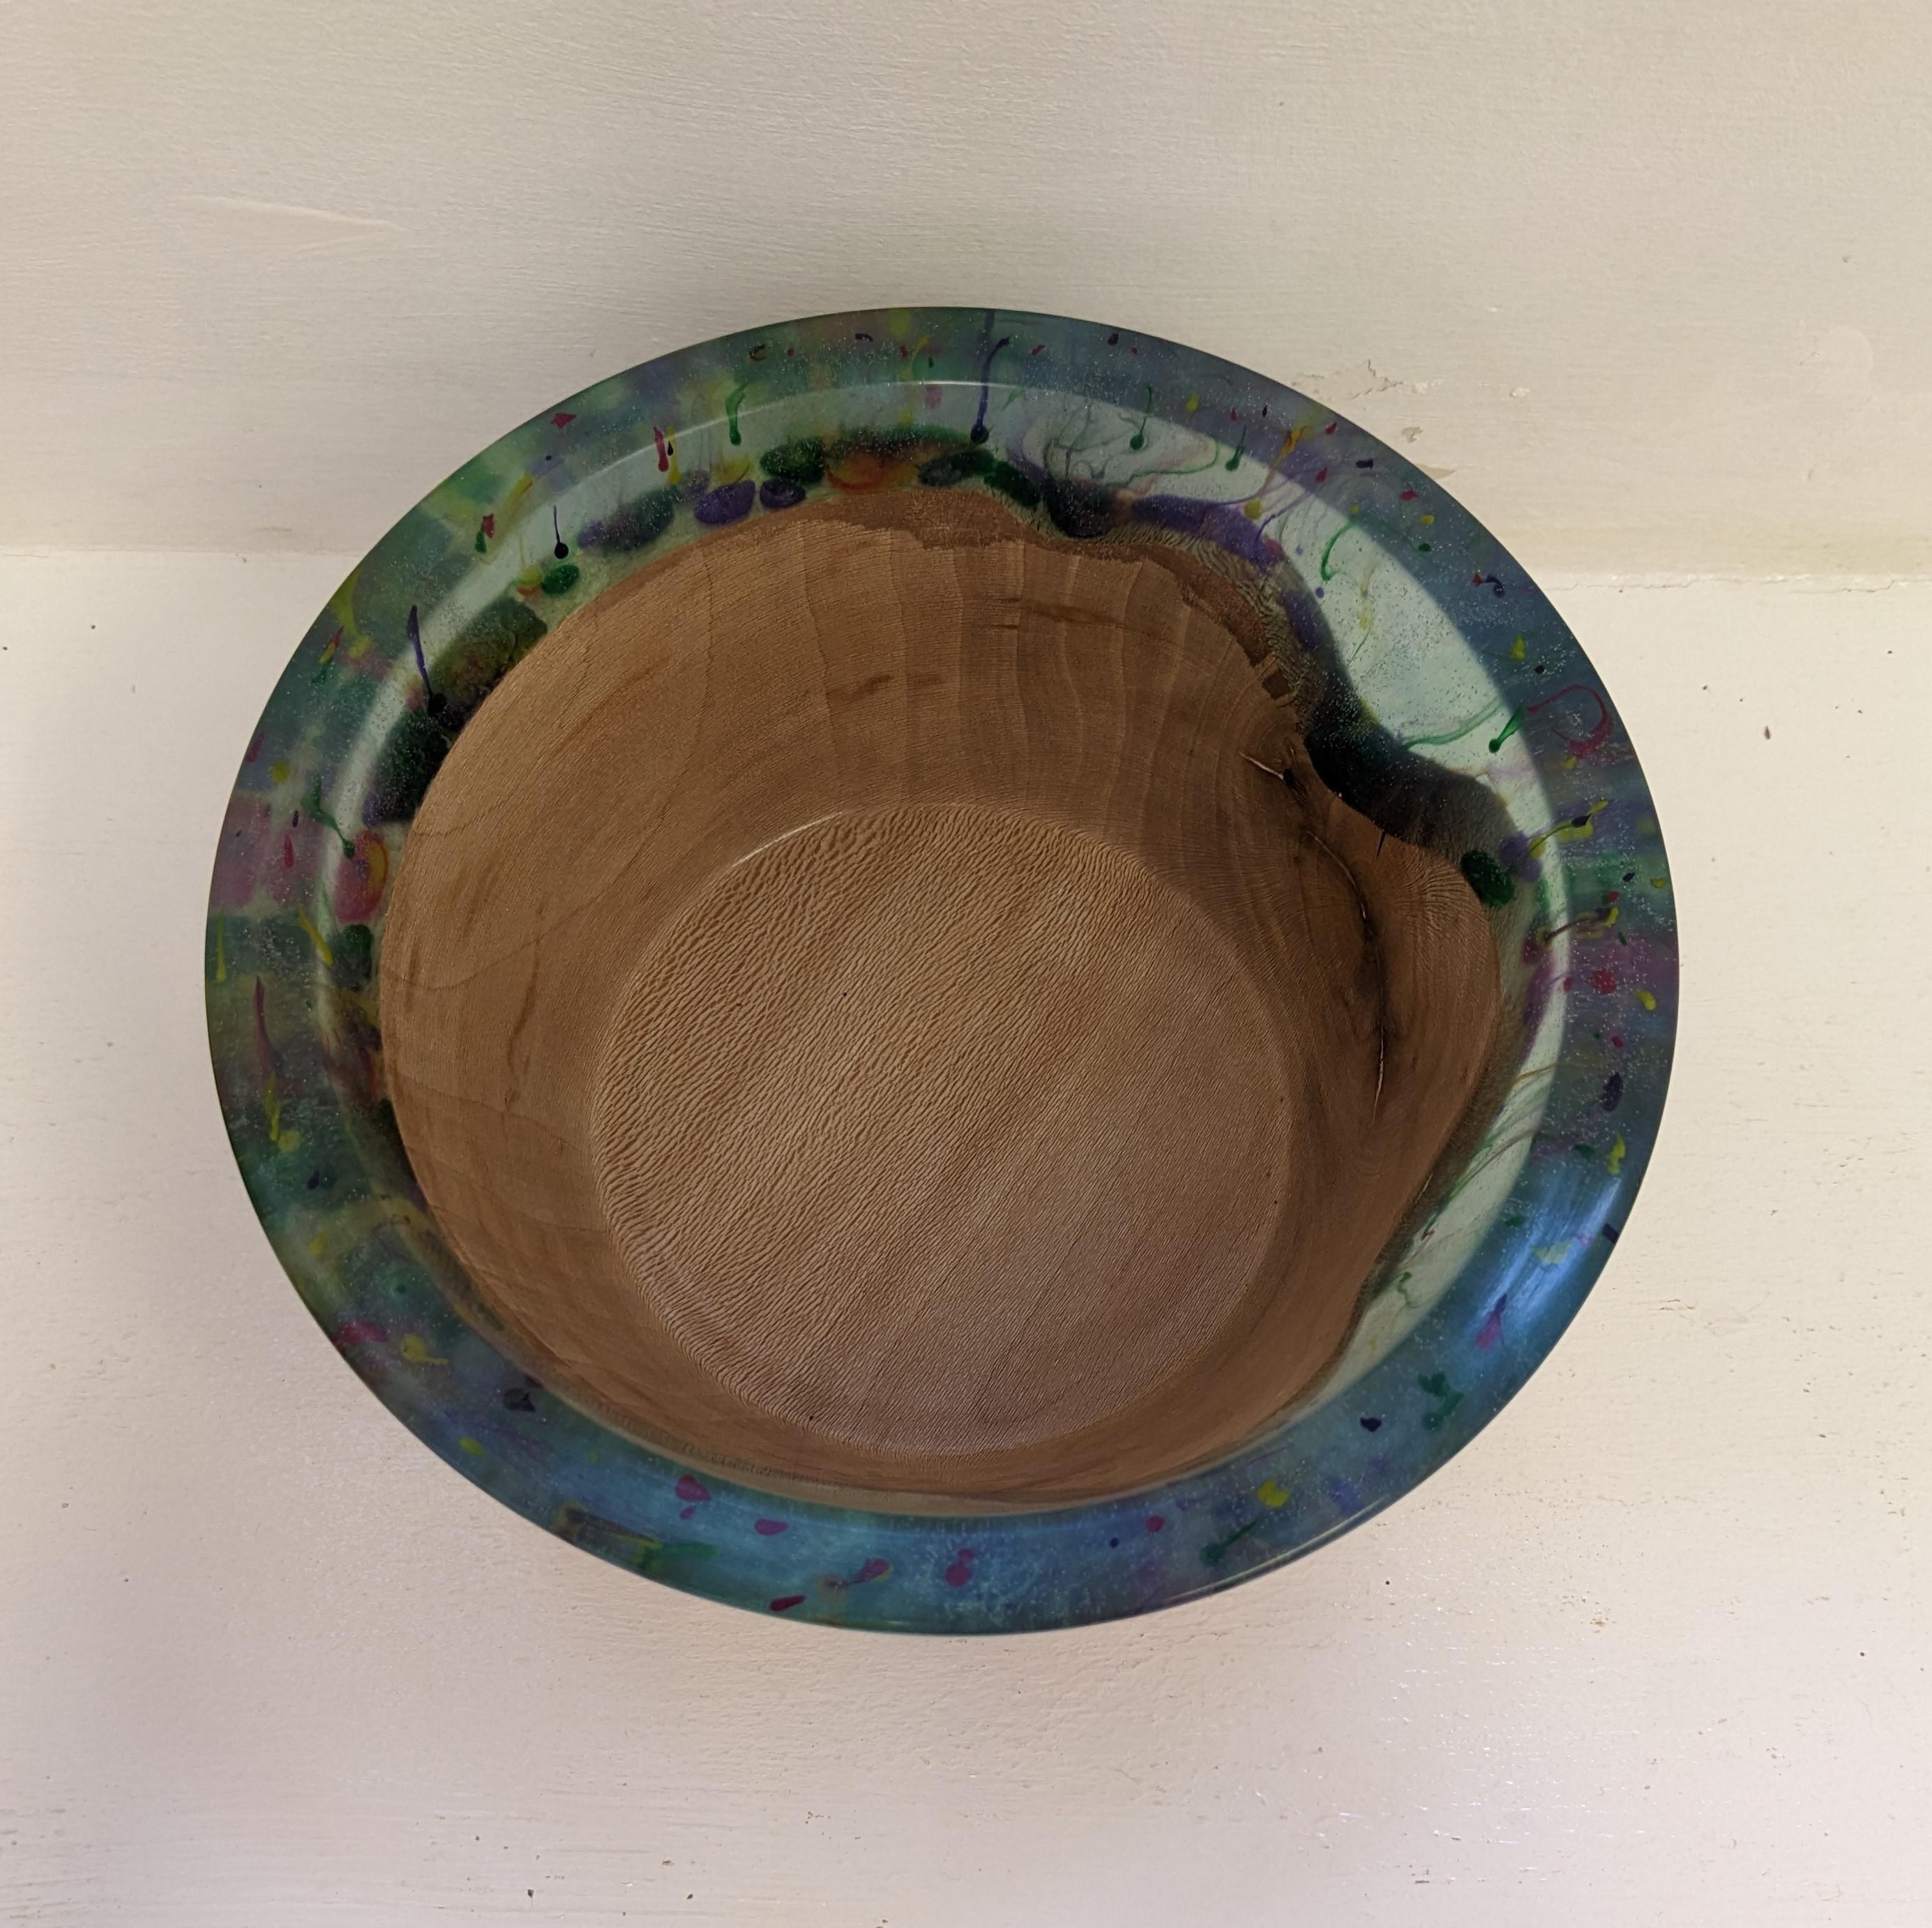 London Plane and Resin Bowl